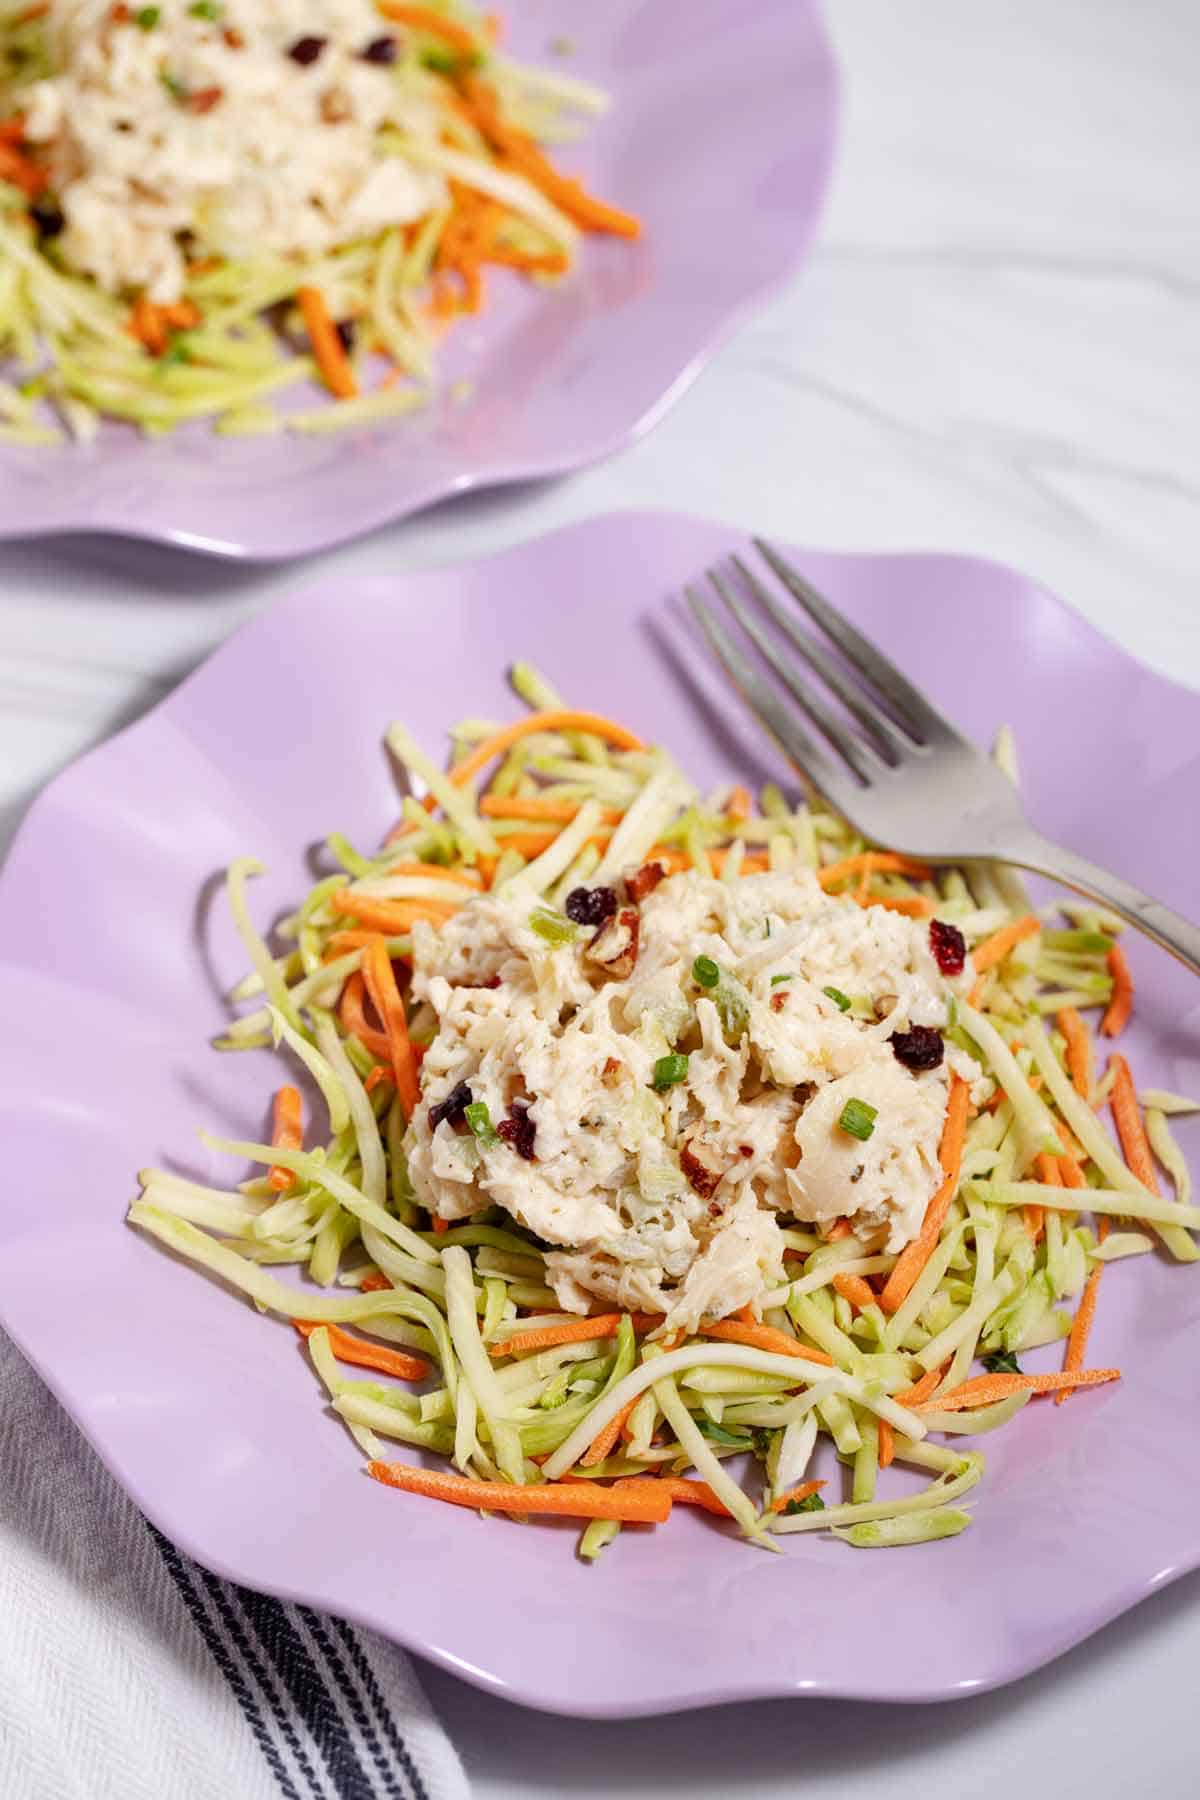 Chicken salad on a bed of coleslaw.